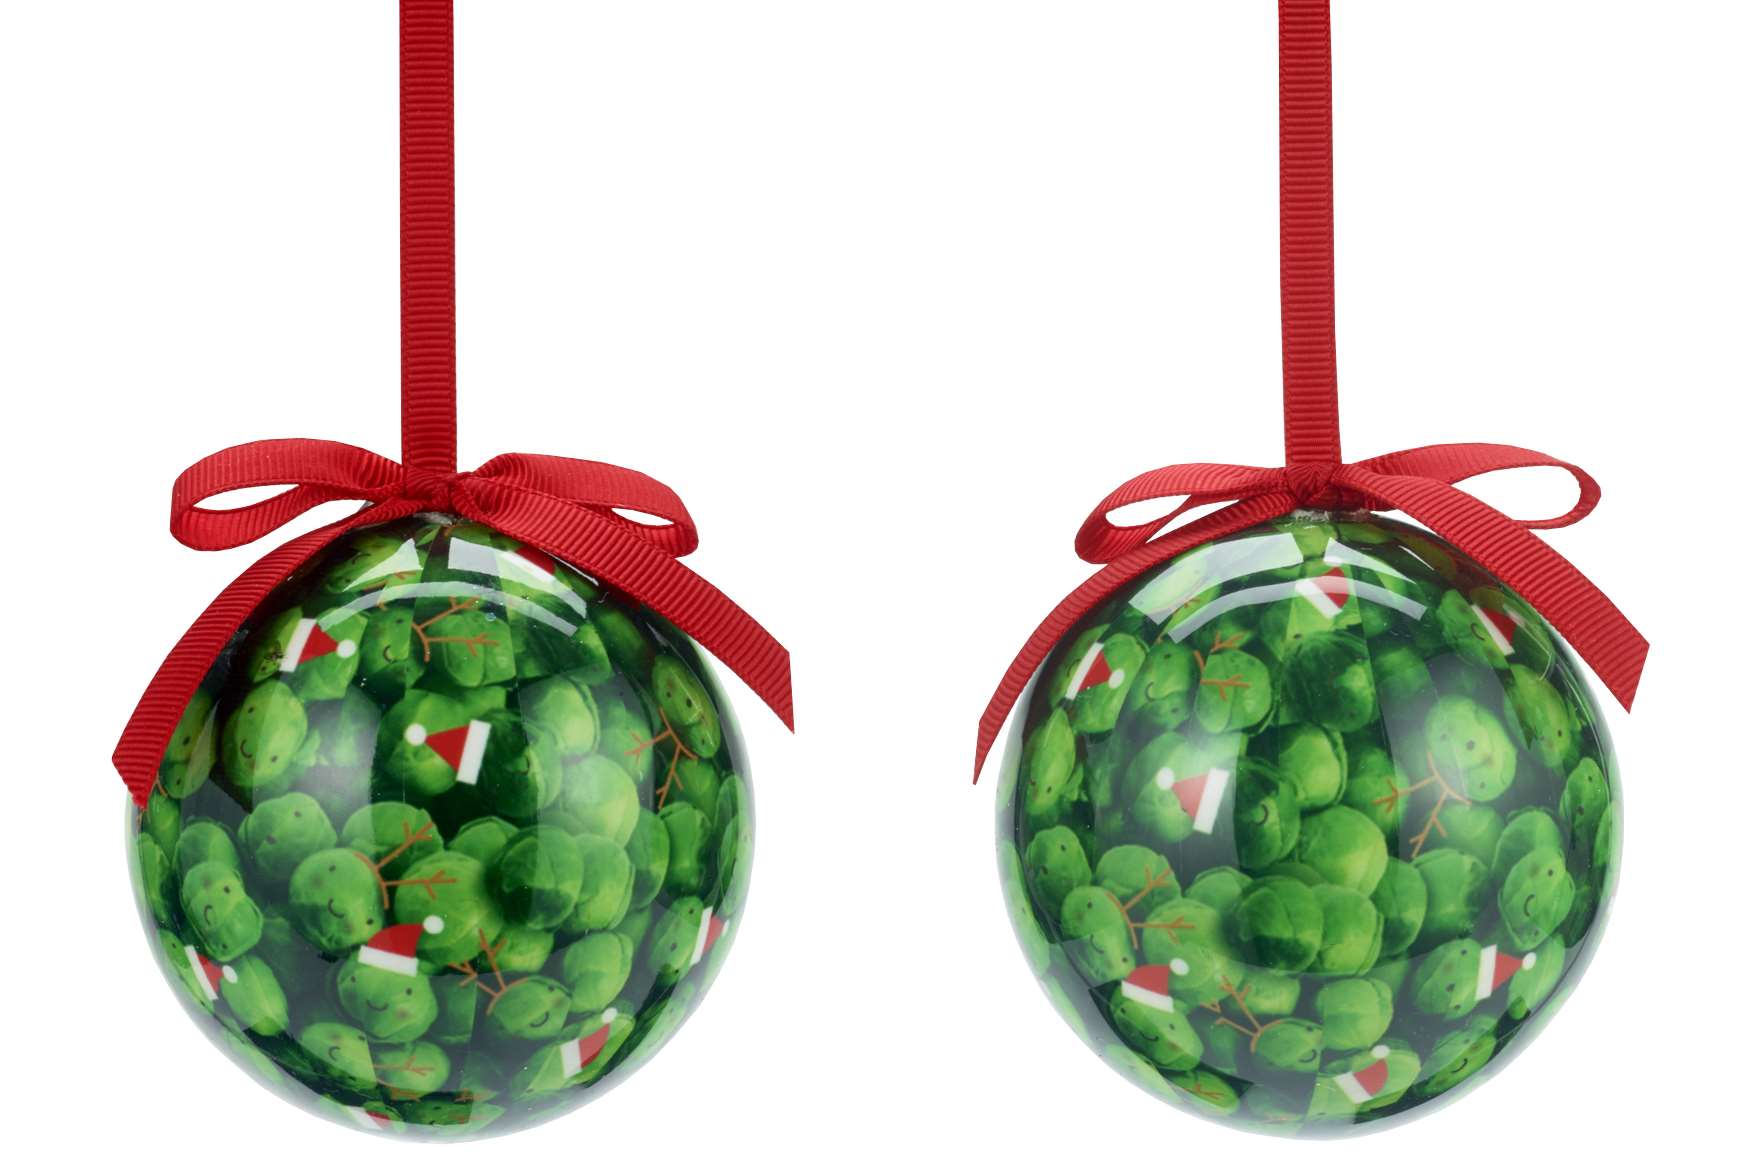 Everyone will love sprouts this year, thanks to these super baubles from Paperchase. They cost £7 for four.